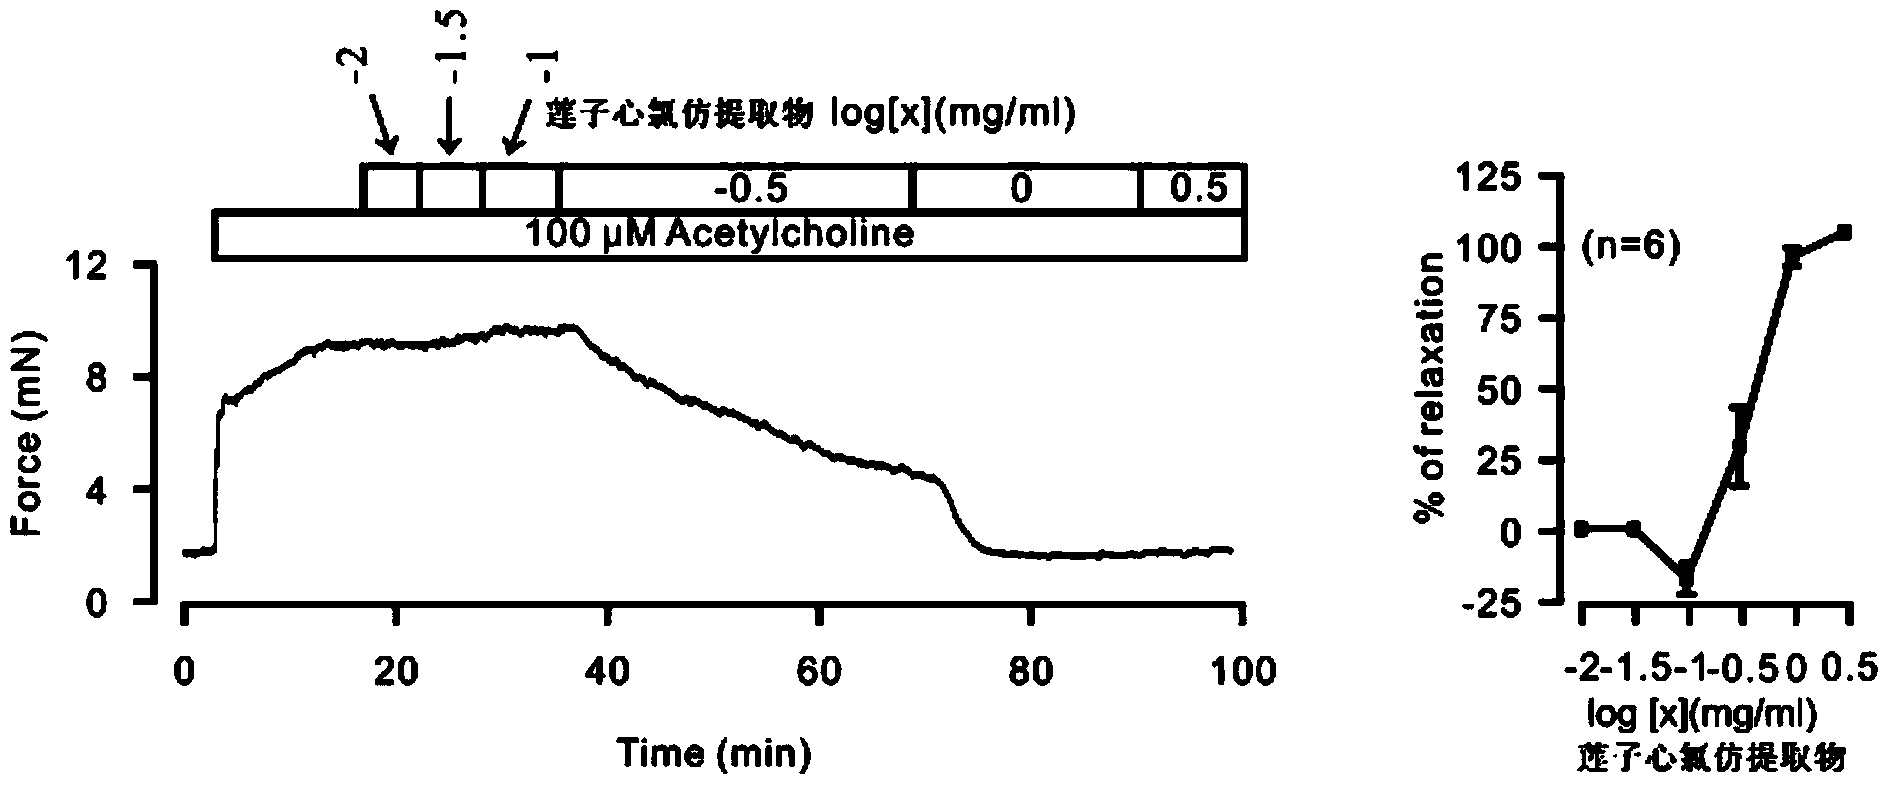 Lotus plumule chloroform extract and preparation method and use thereof